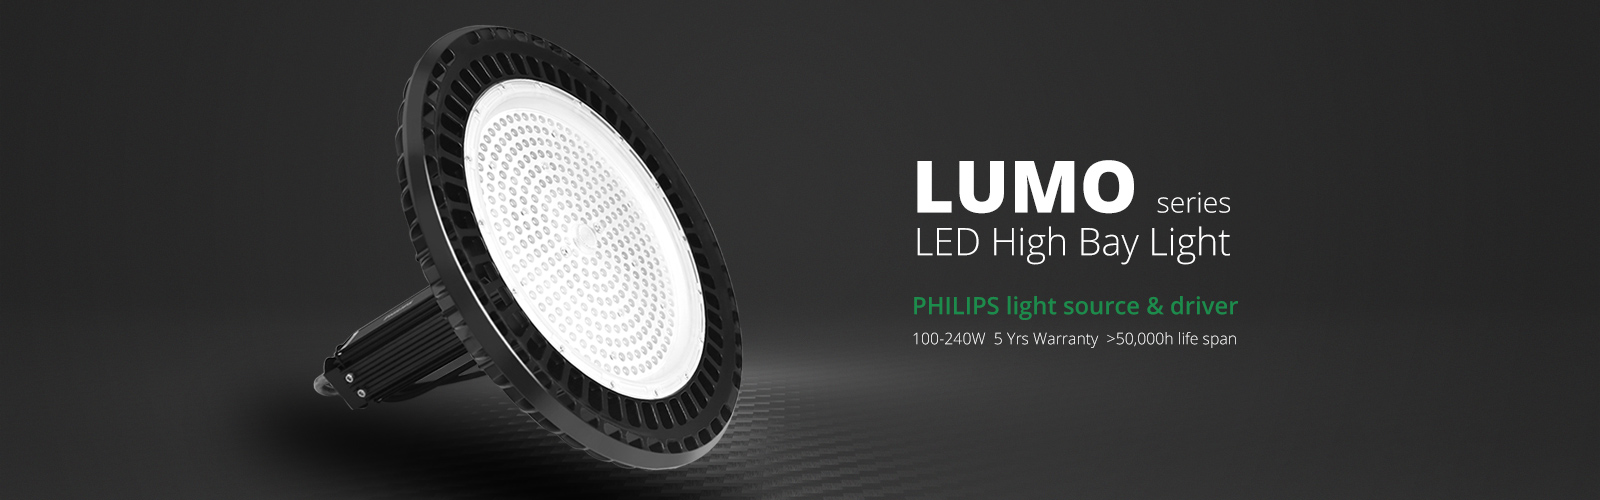 Company news-the lastest news of BBE led  light manufacturer